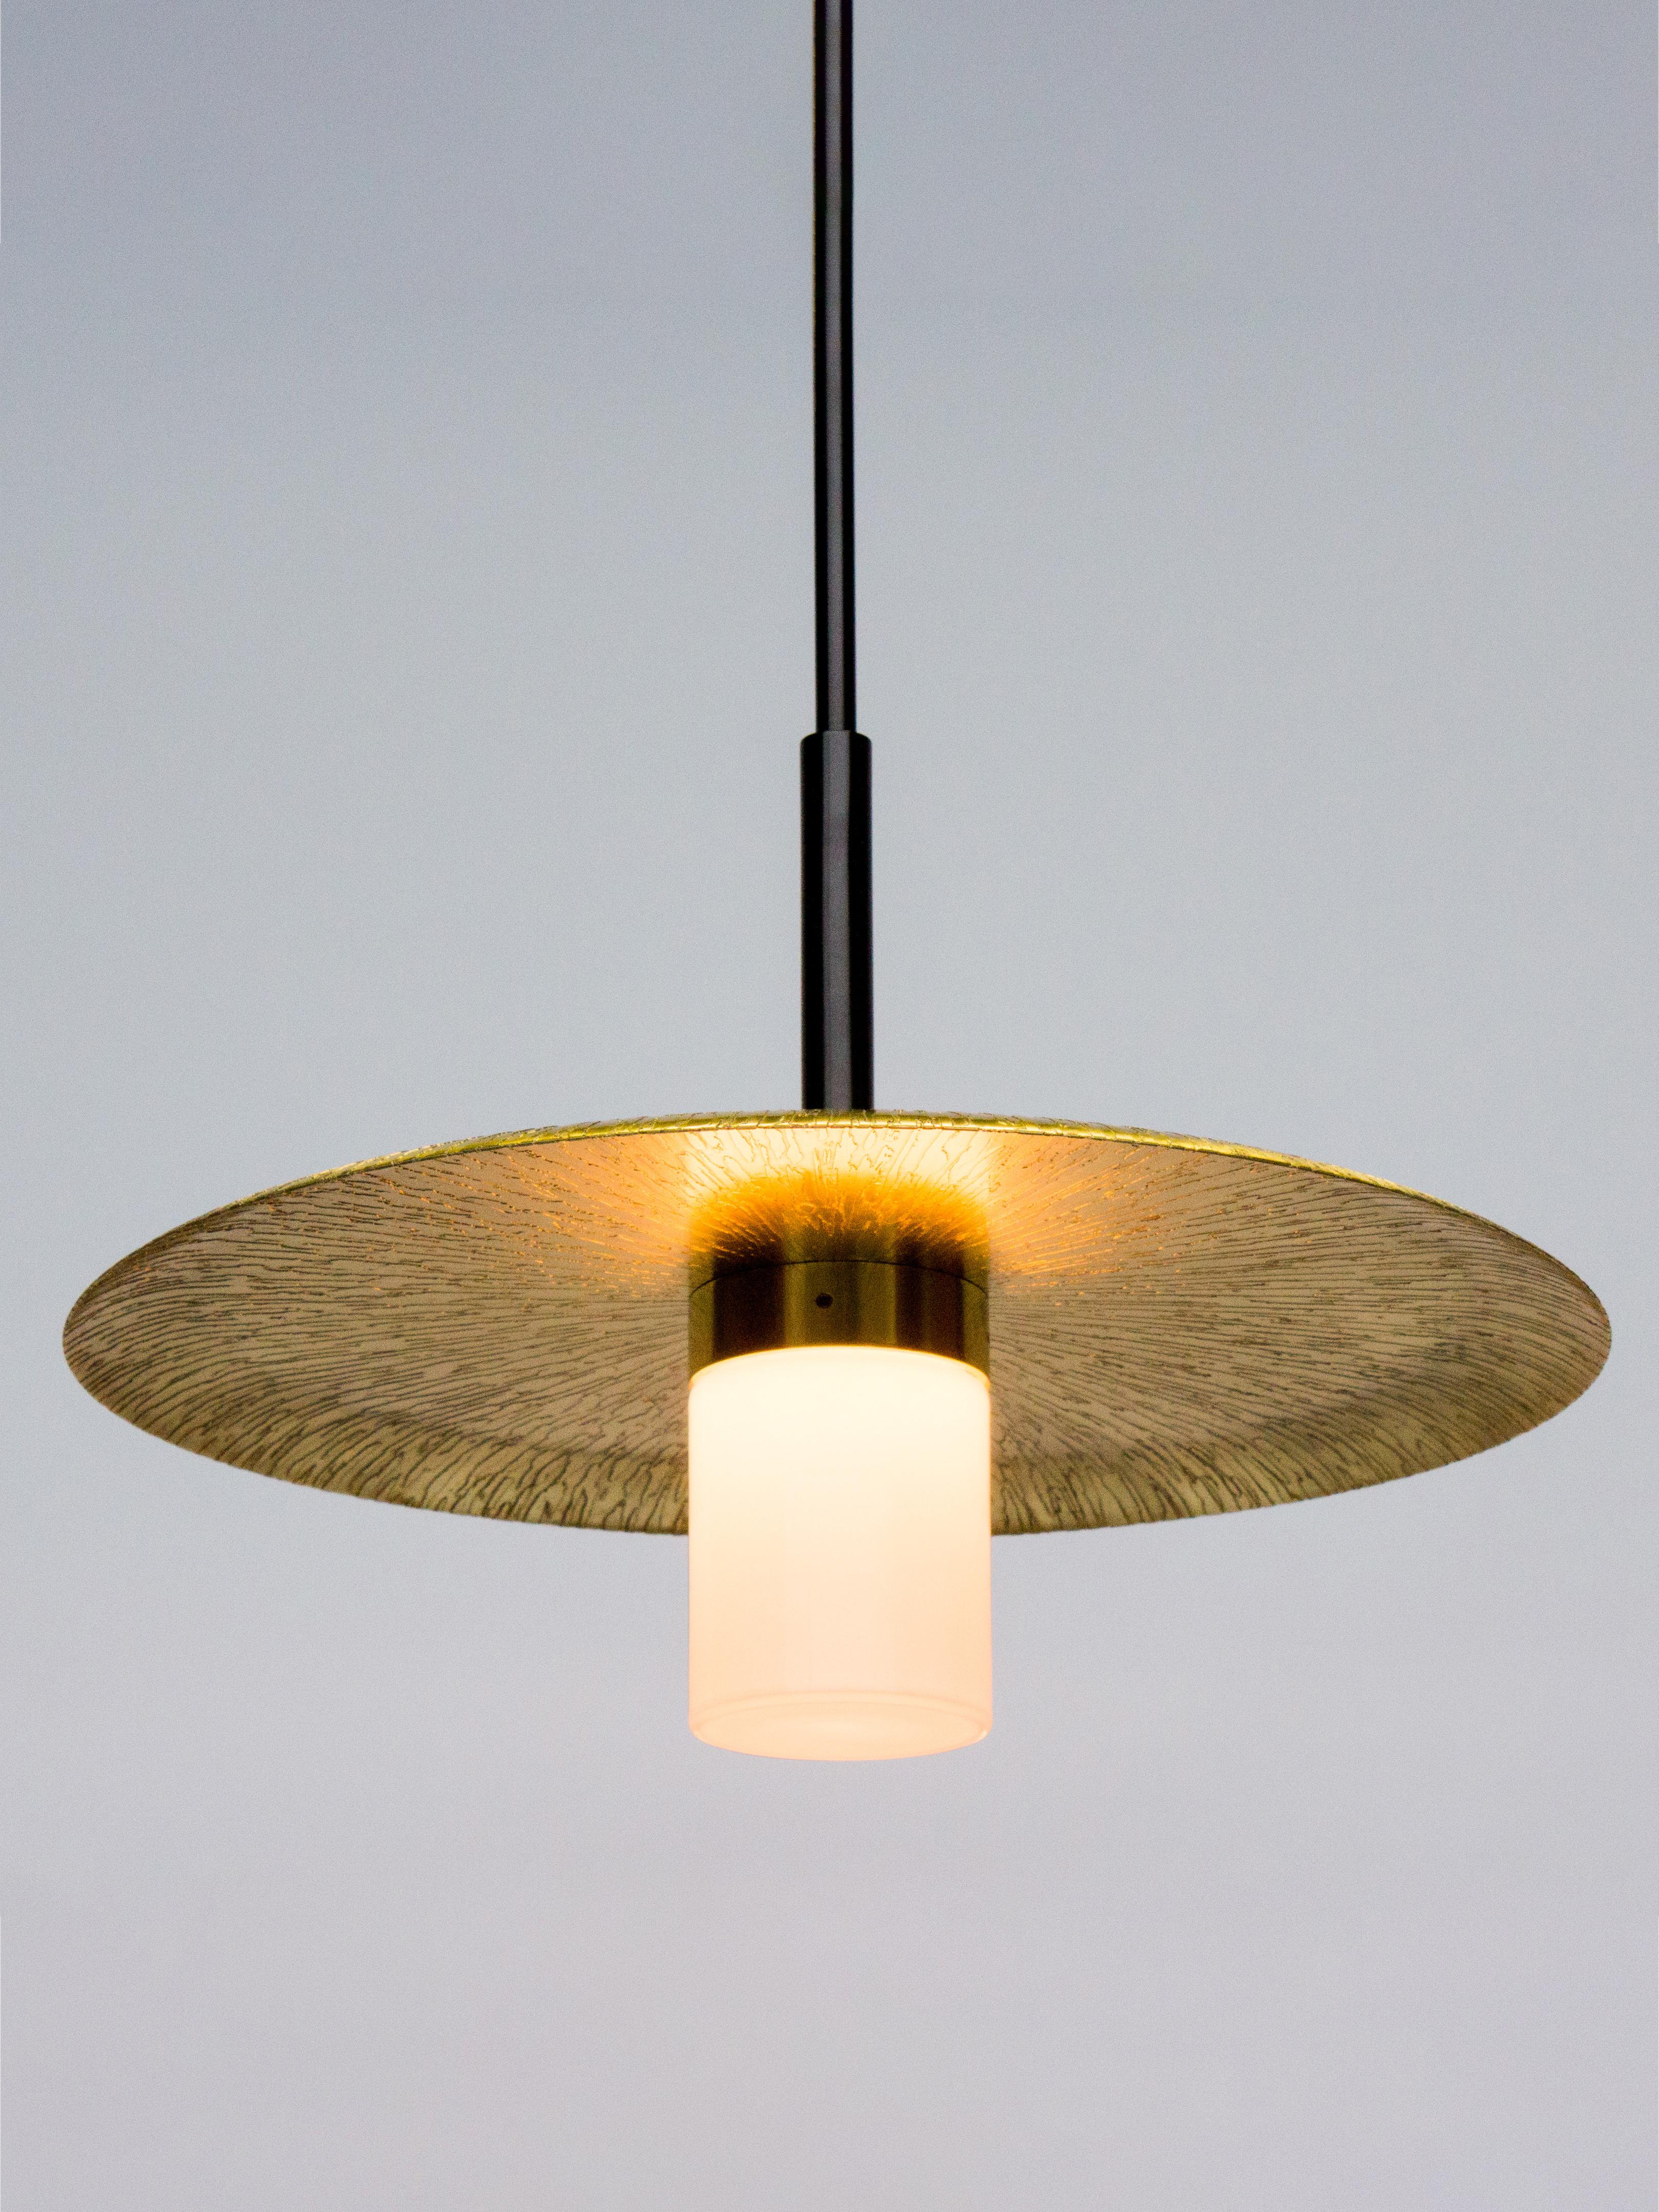 The Arthur Pendant’s spun shade is the playing field for several unique hand applied textured reliefs or colored powder-coats. A hand blown glass cylinder shines light on the powder-coated shade. This versatile pendant can function as a solo